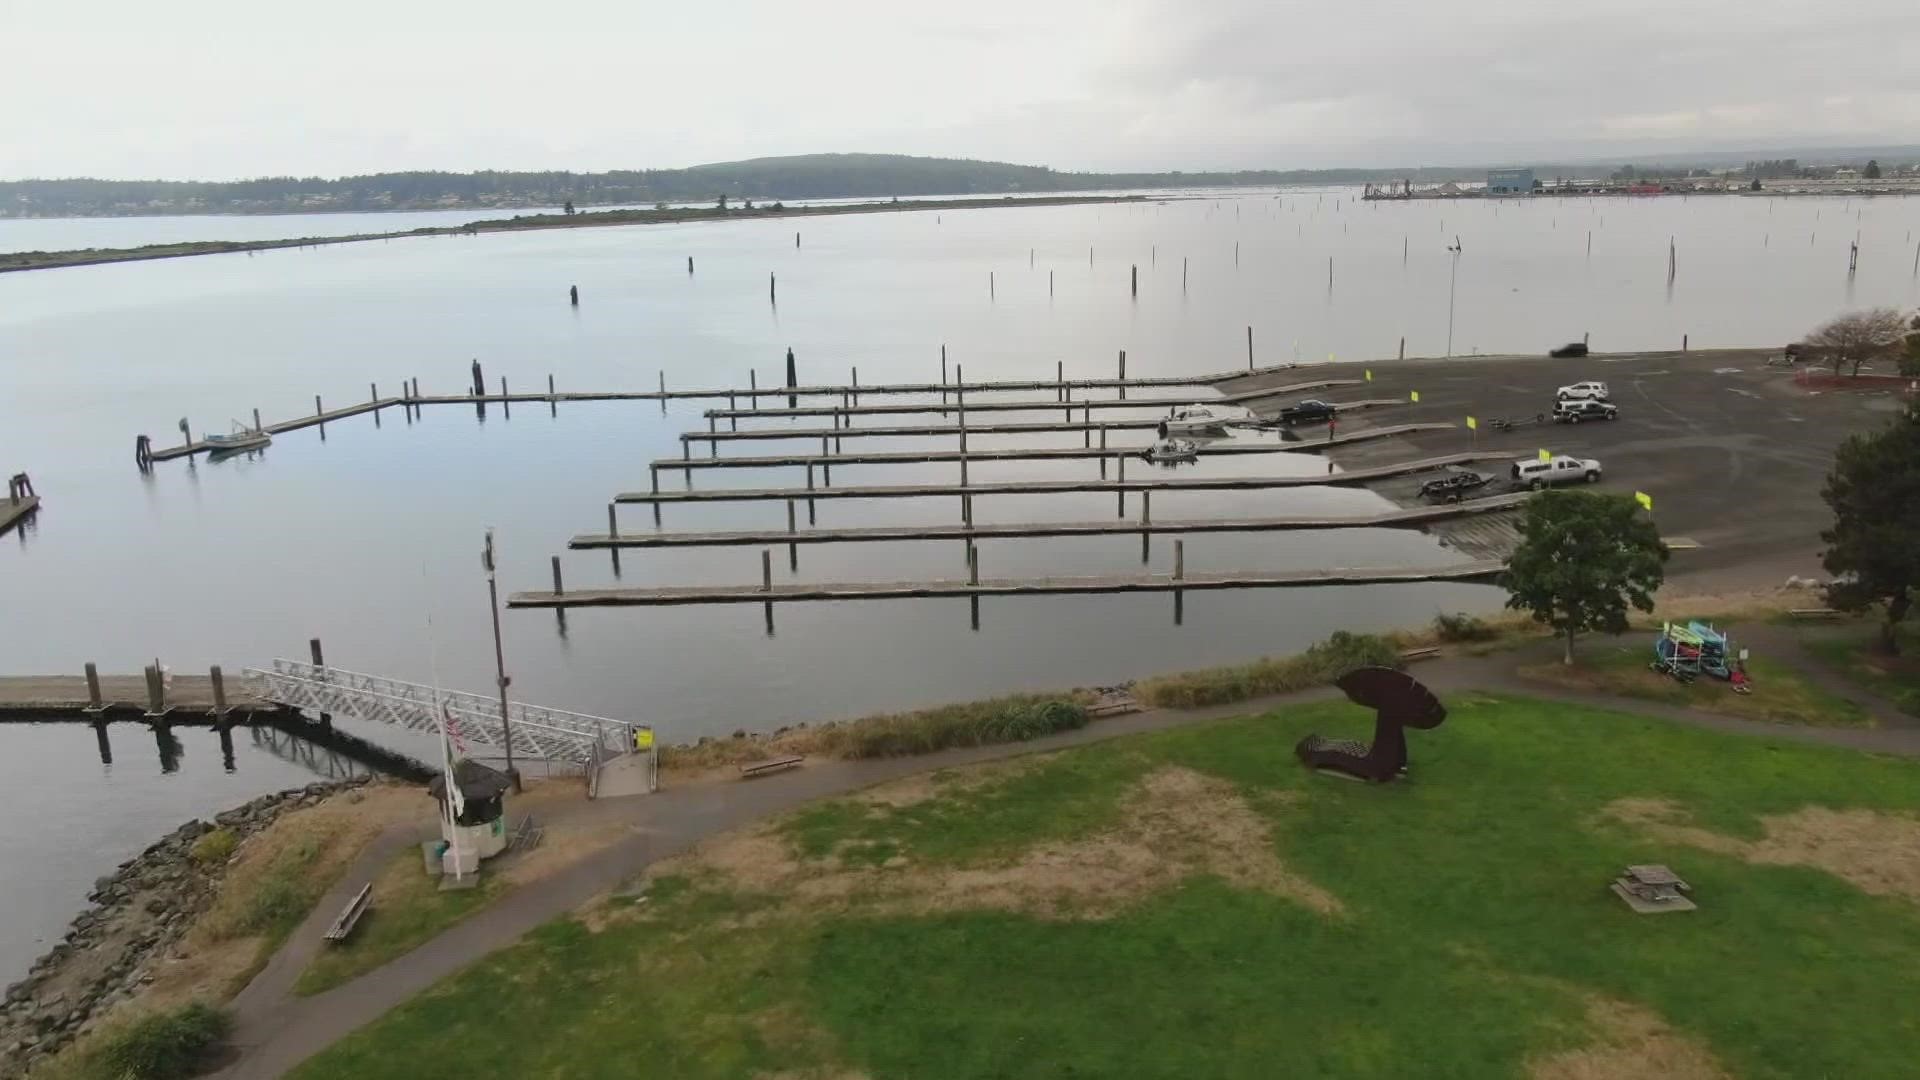 According to the port, the sandbar formed due to storm events that pushed an unprecedented amount of sediment out of the mouth of the Snohomish River.